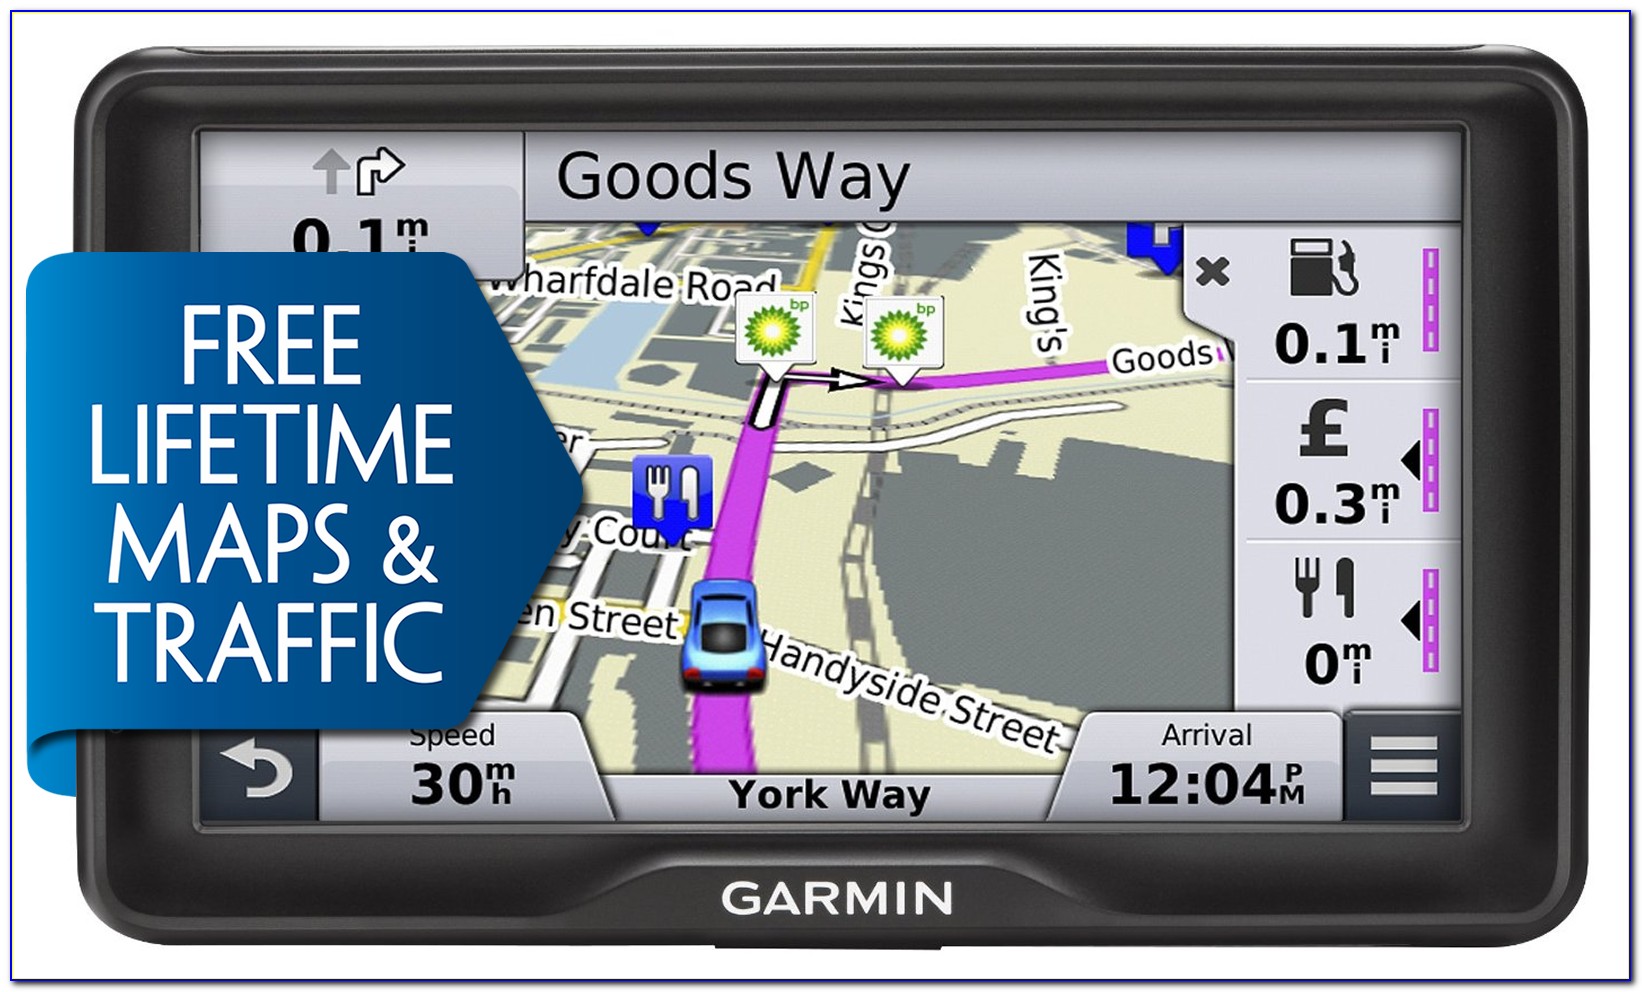 How To Update Maps On Garmin Nuvi 205w For Free